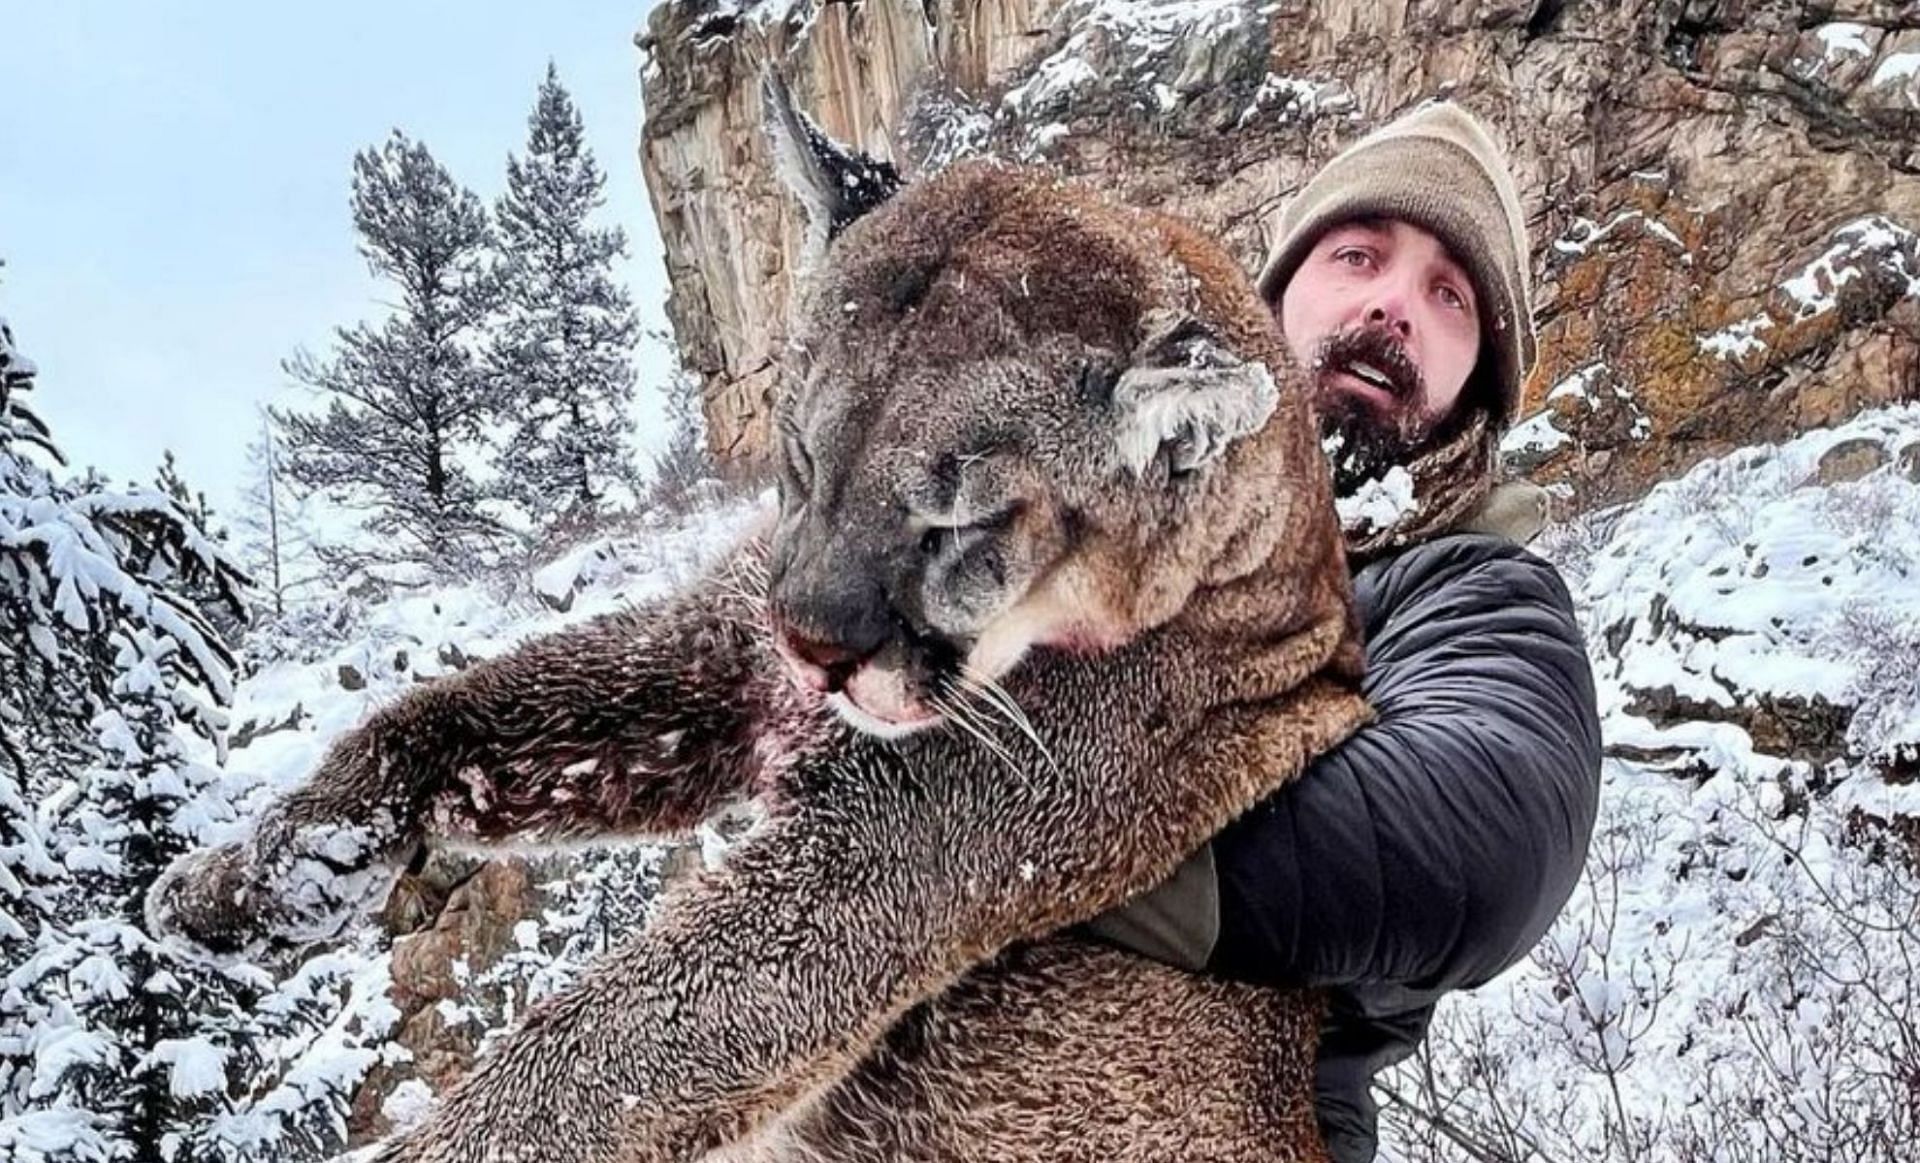 Former Broncos star shows little remorse over killing mountain lion